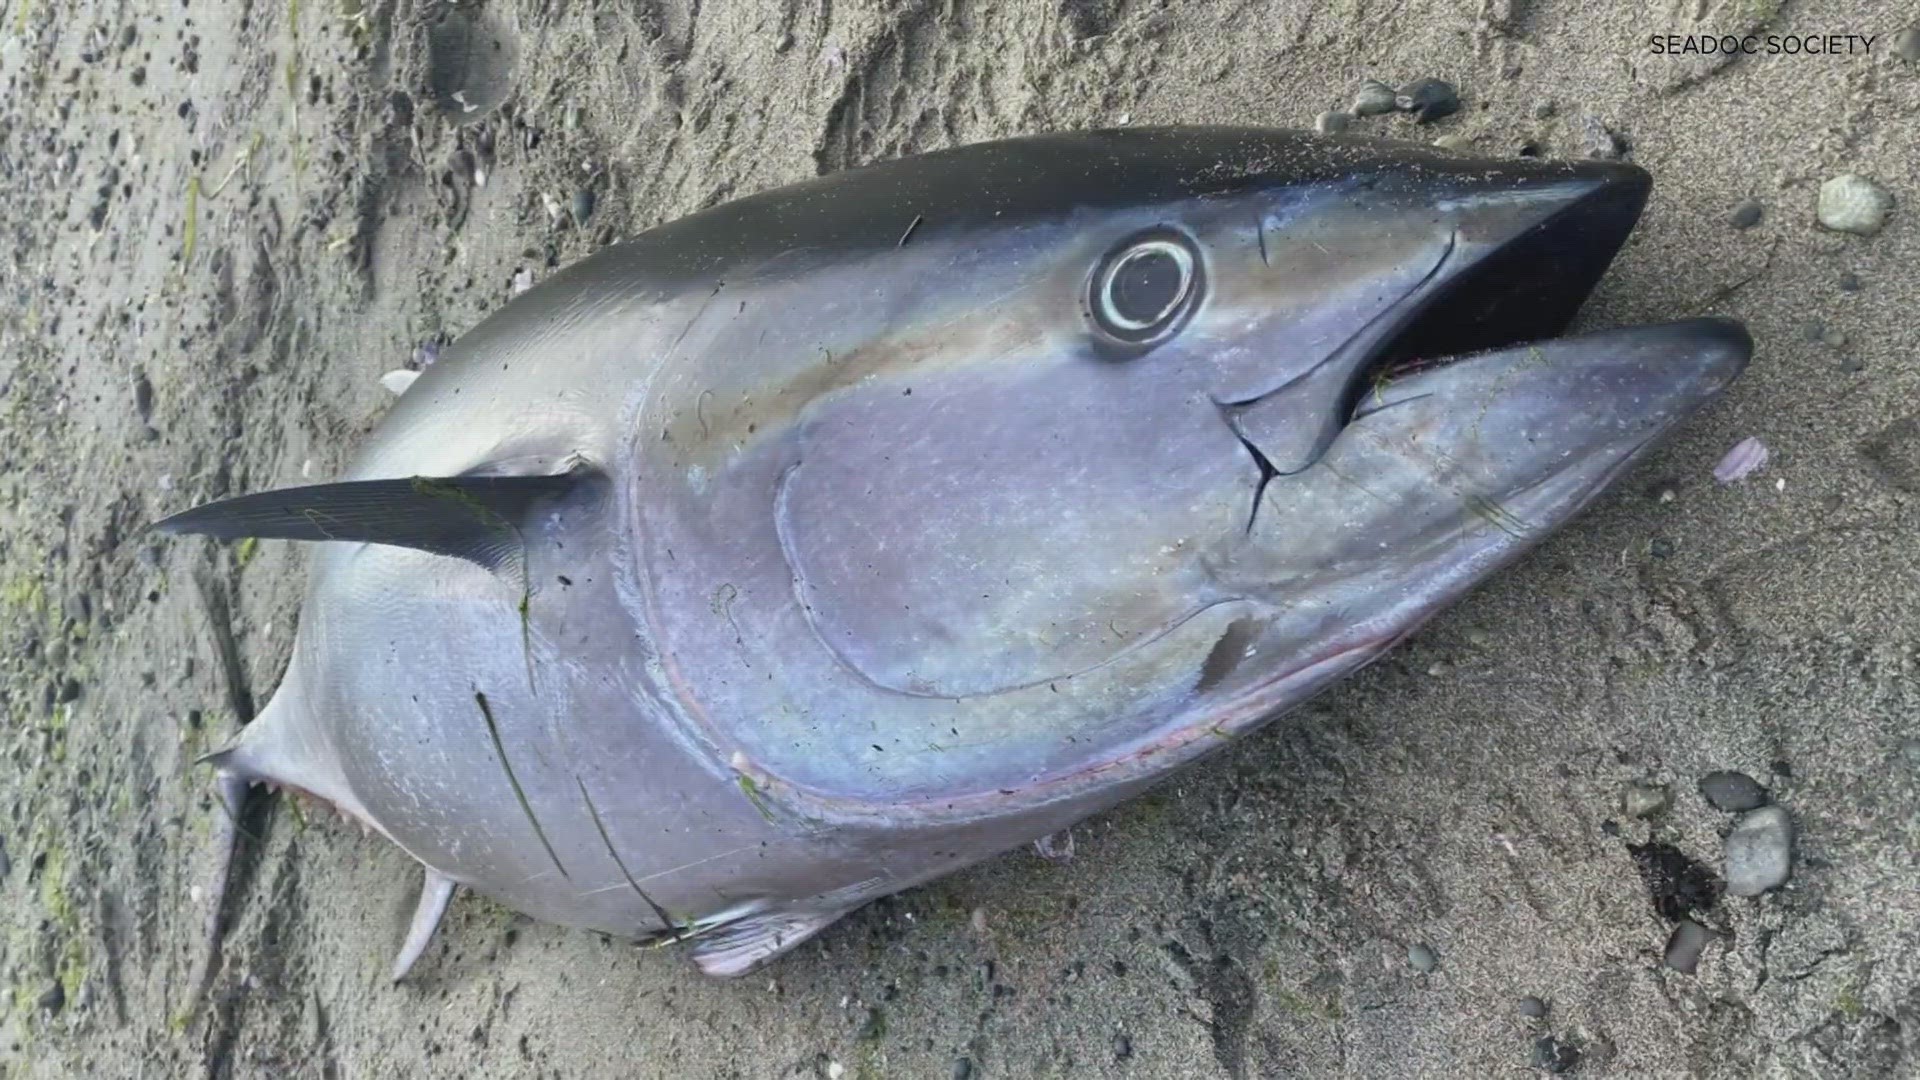 Pacific bluefin tuna found washed up on Orcas Island